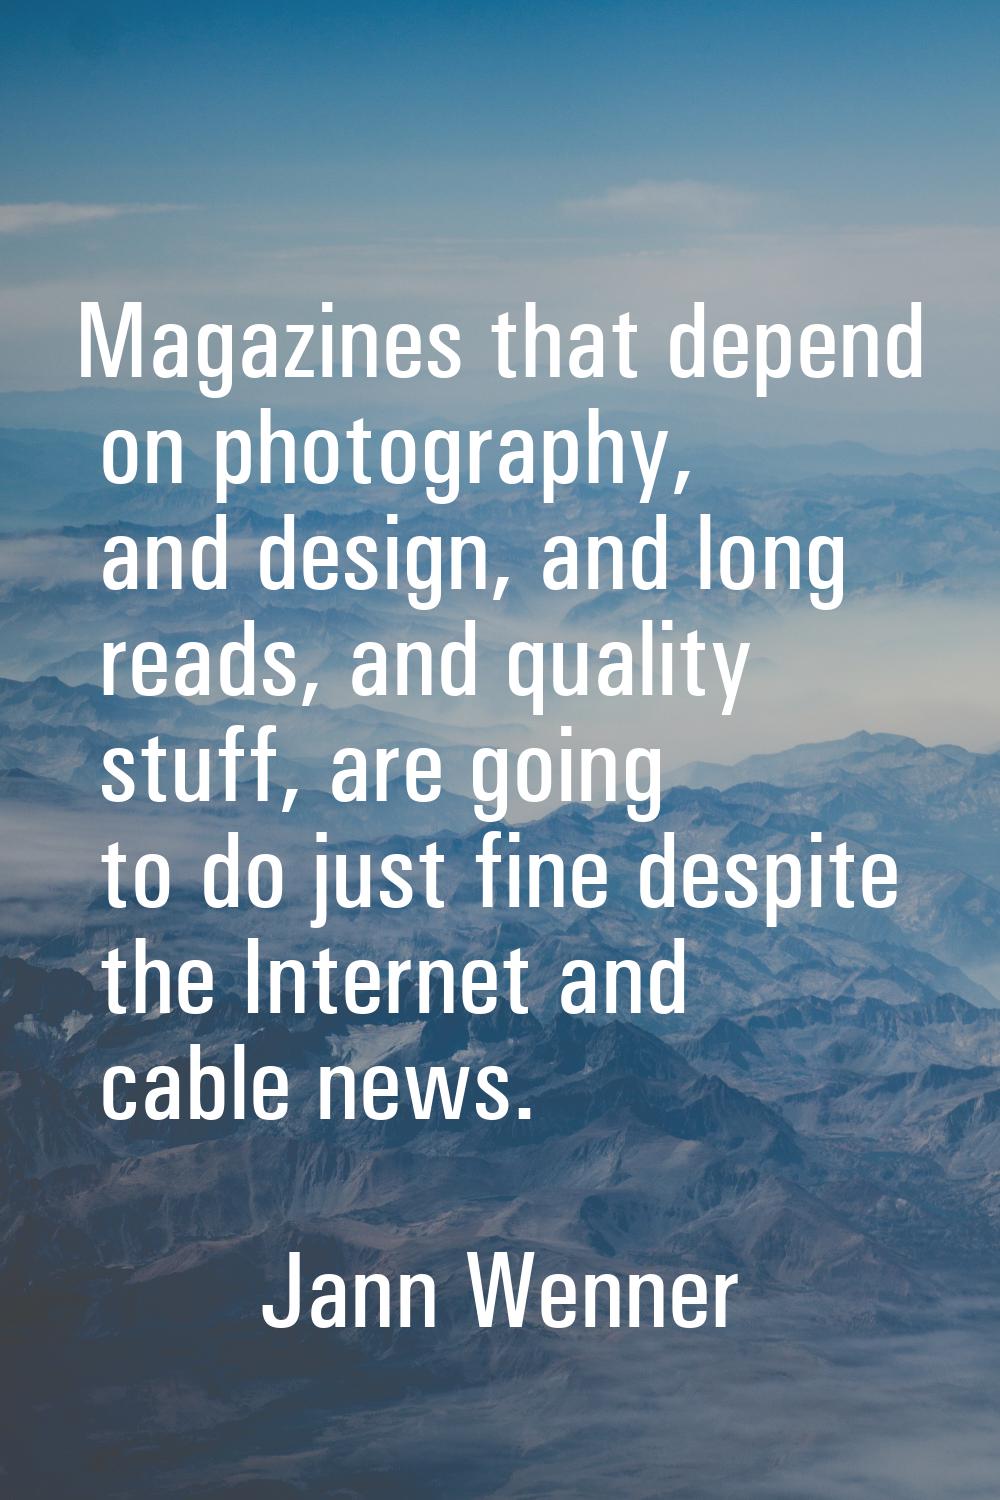 Magazines that depend on photography, and design, and long reads, and quality stuff, are going to d